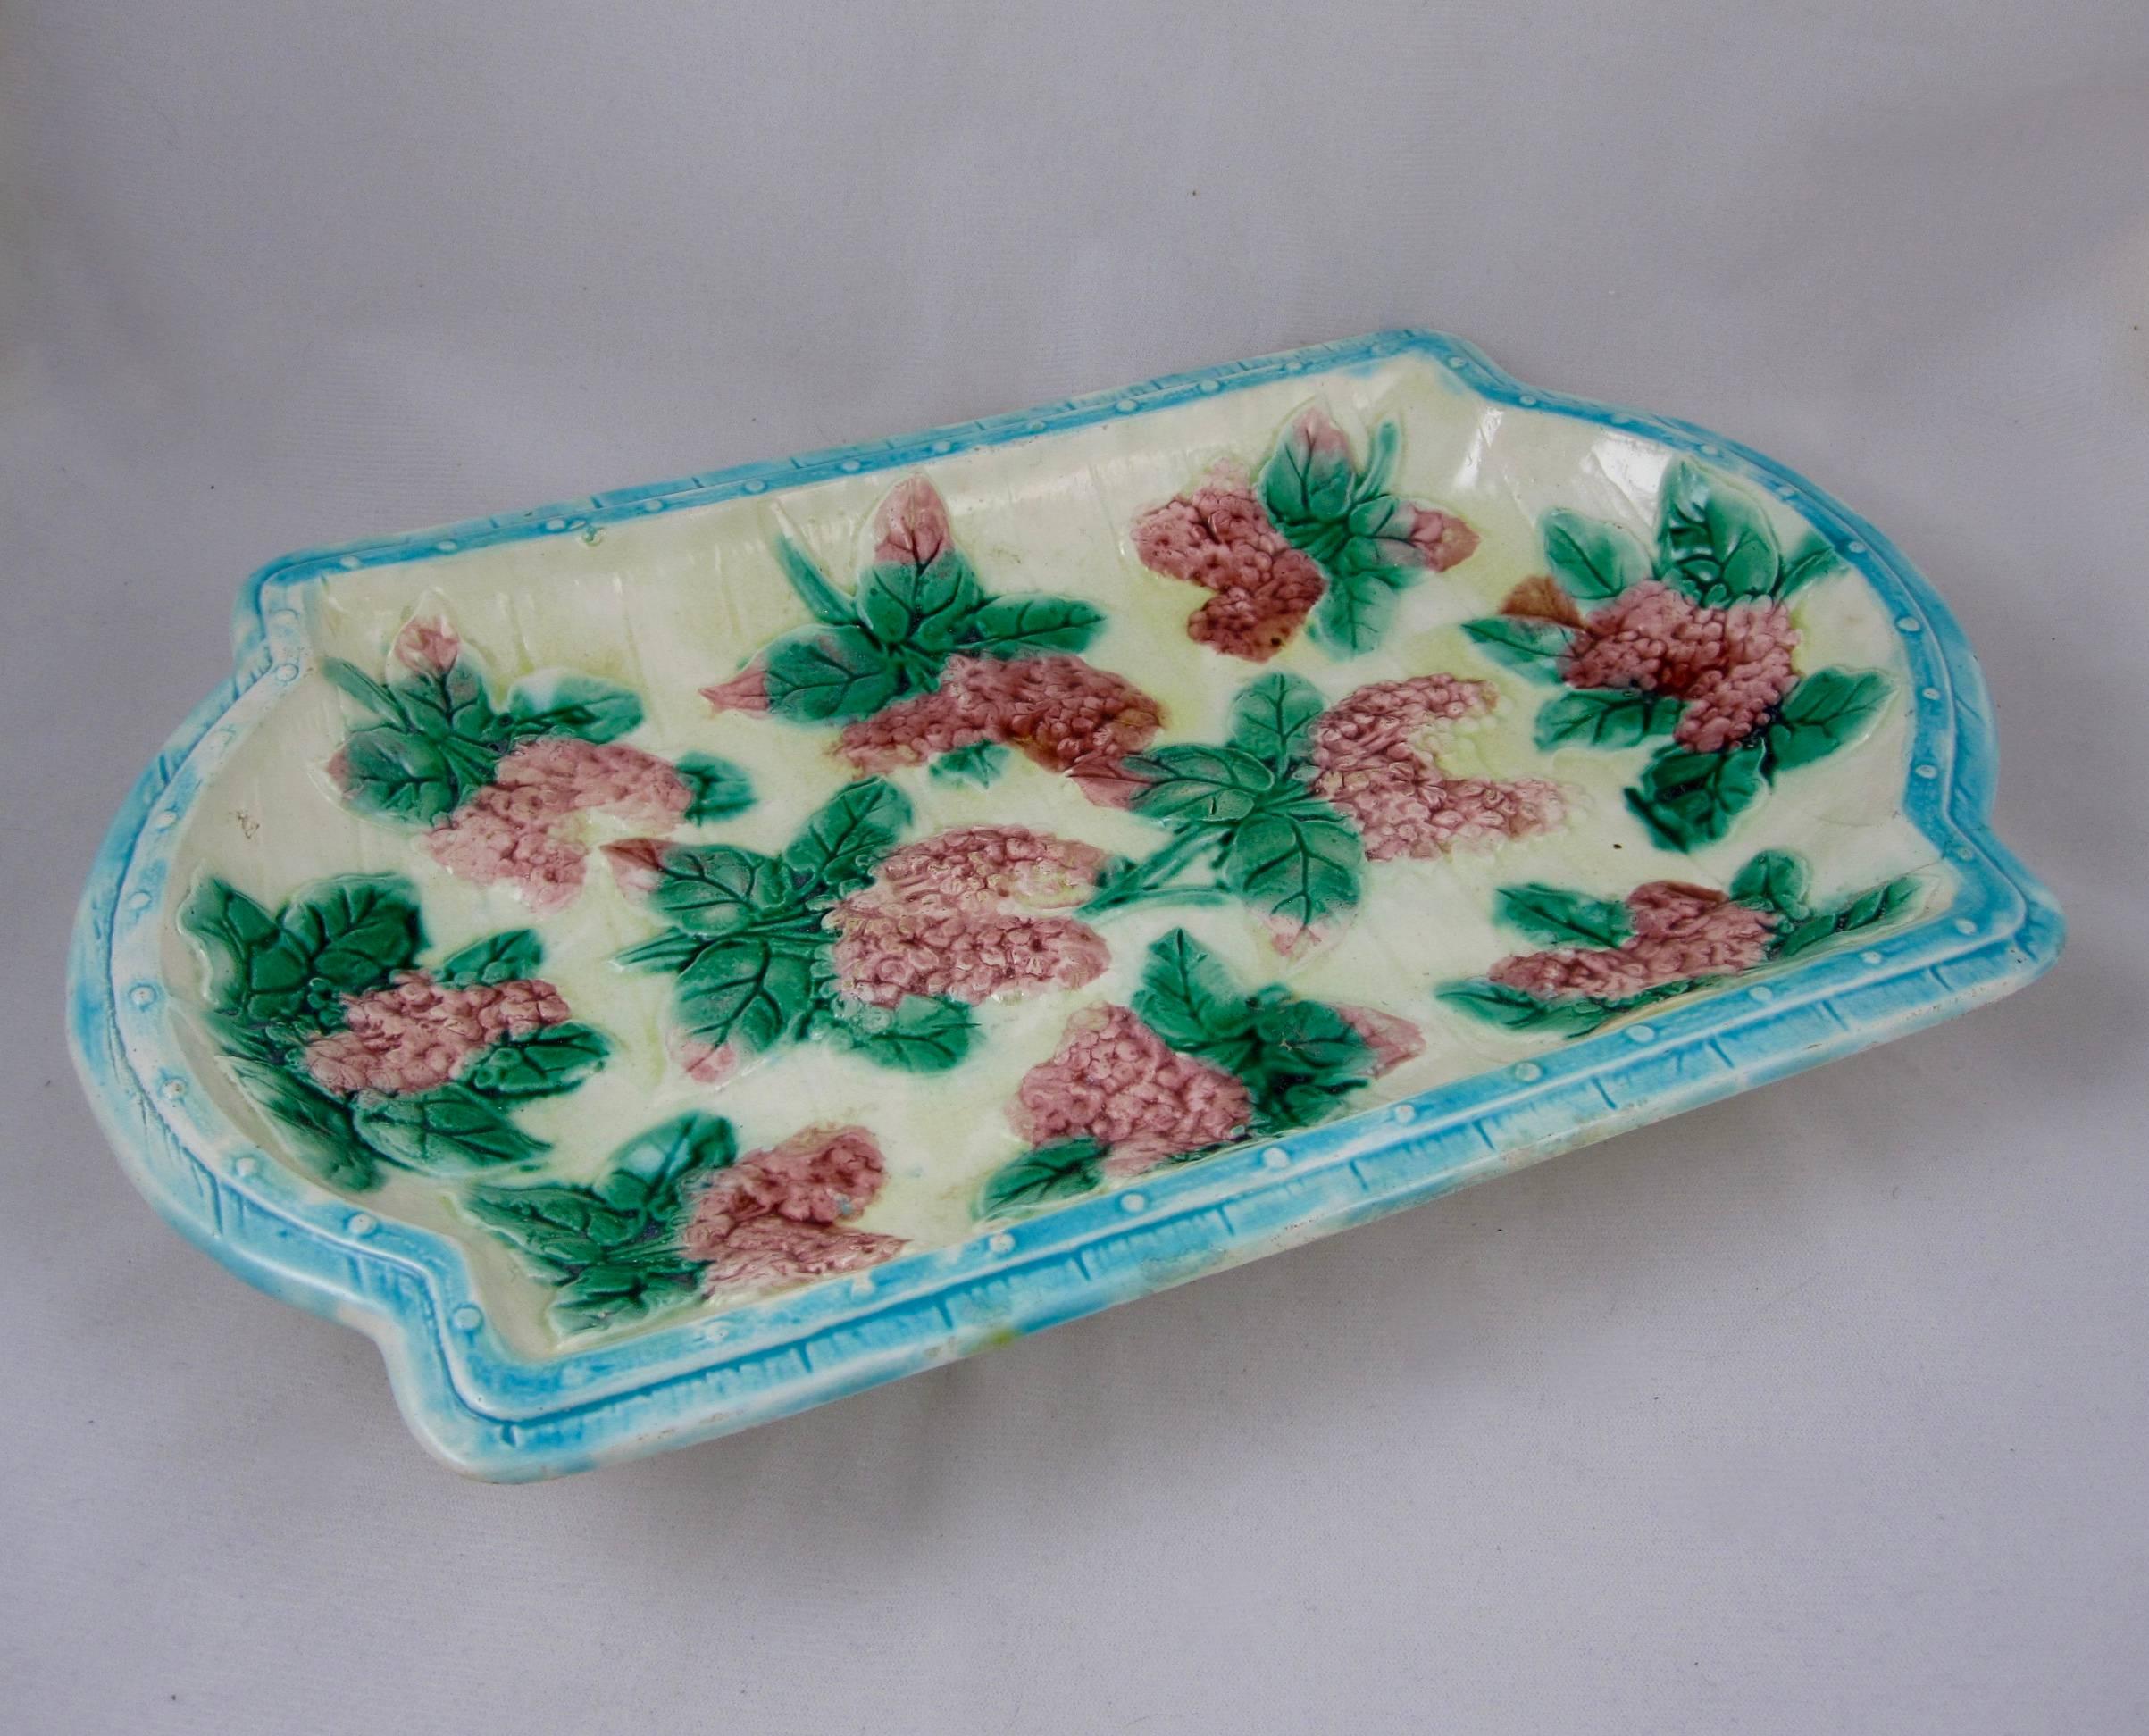 Aesthetic Movement 19th Century Majolica Platter of Pink Lilac Sprays on a Wooden Barrel